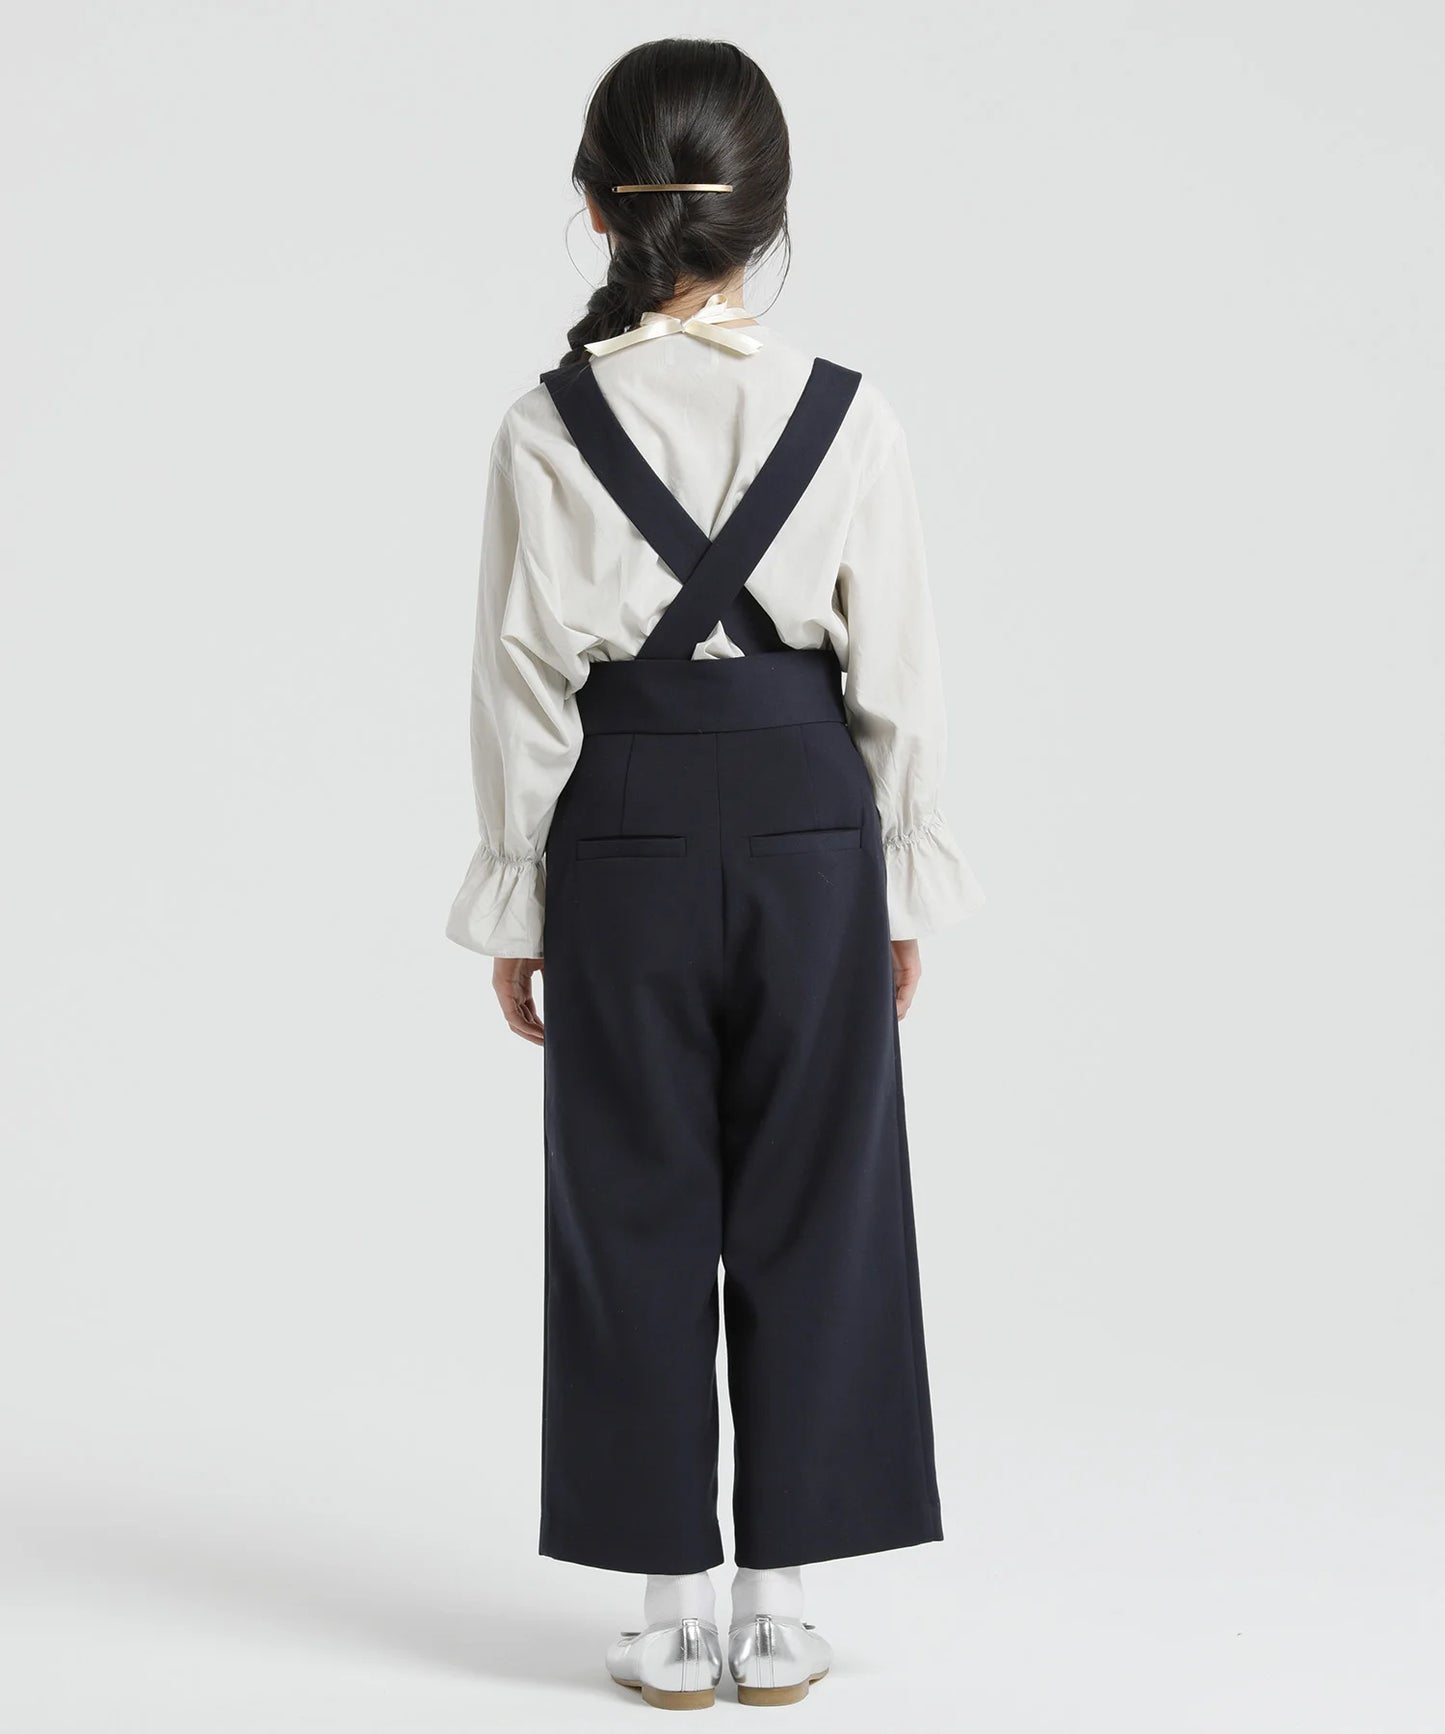 OUTLET SUSPENDERS PANTS